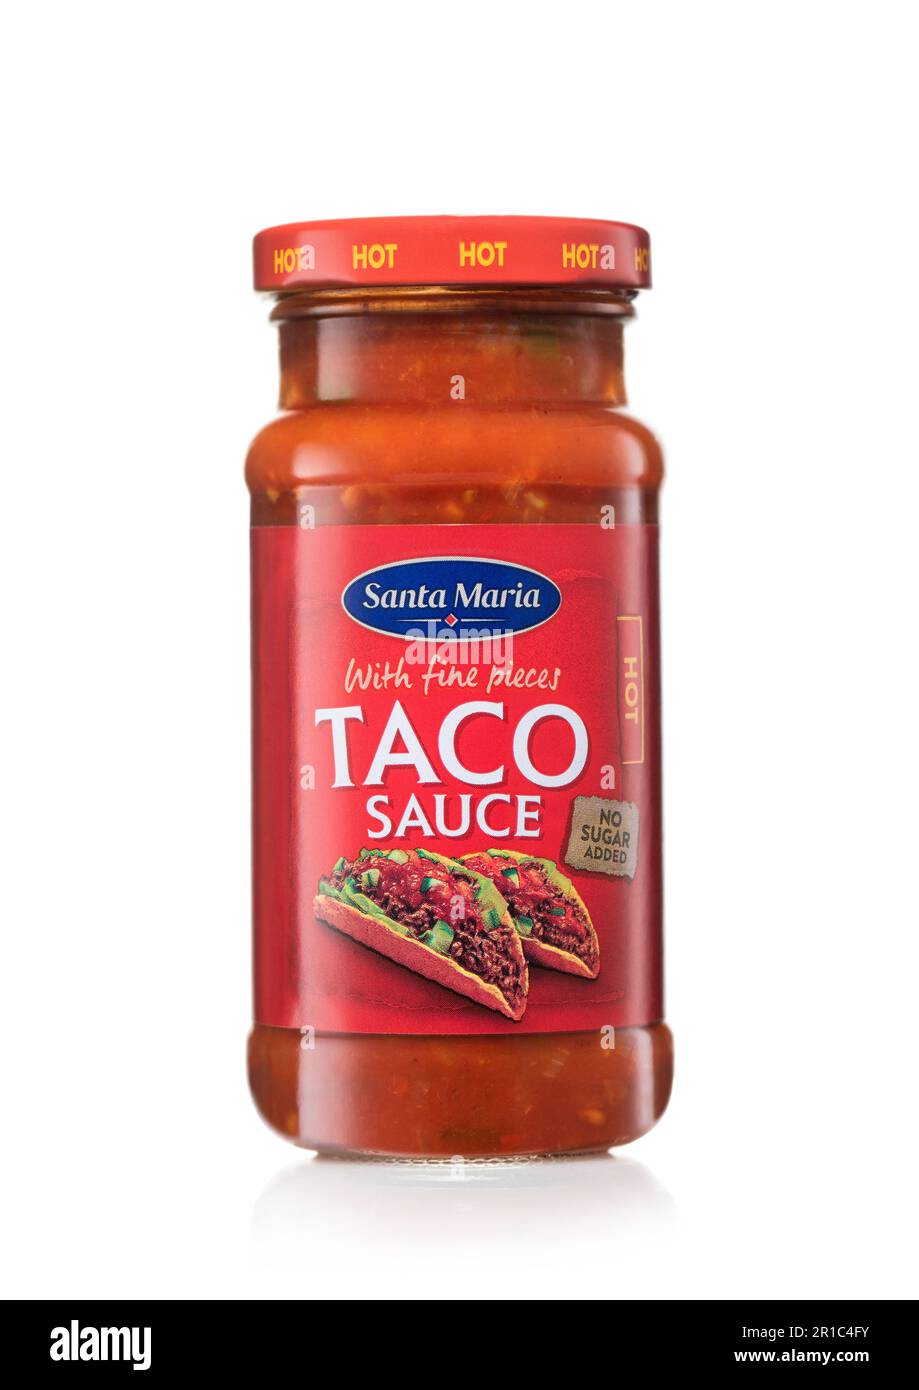 LONDON,UK - APRIL 12, 2023: Hot Taco sauce with fine pieces by Santa Maria on white. Stock Photo